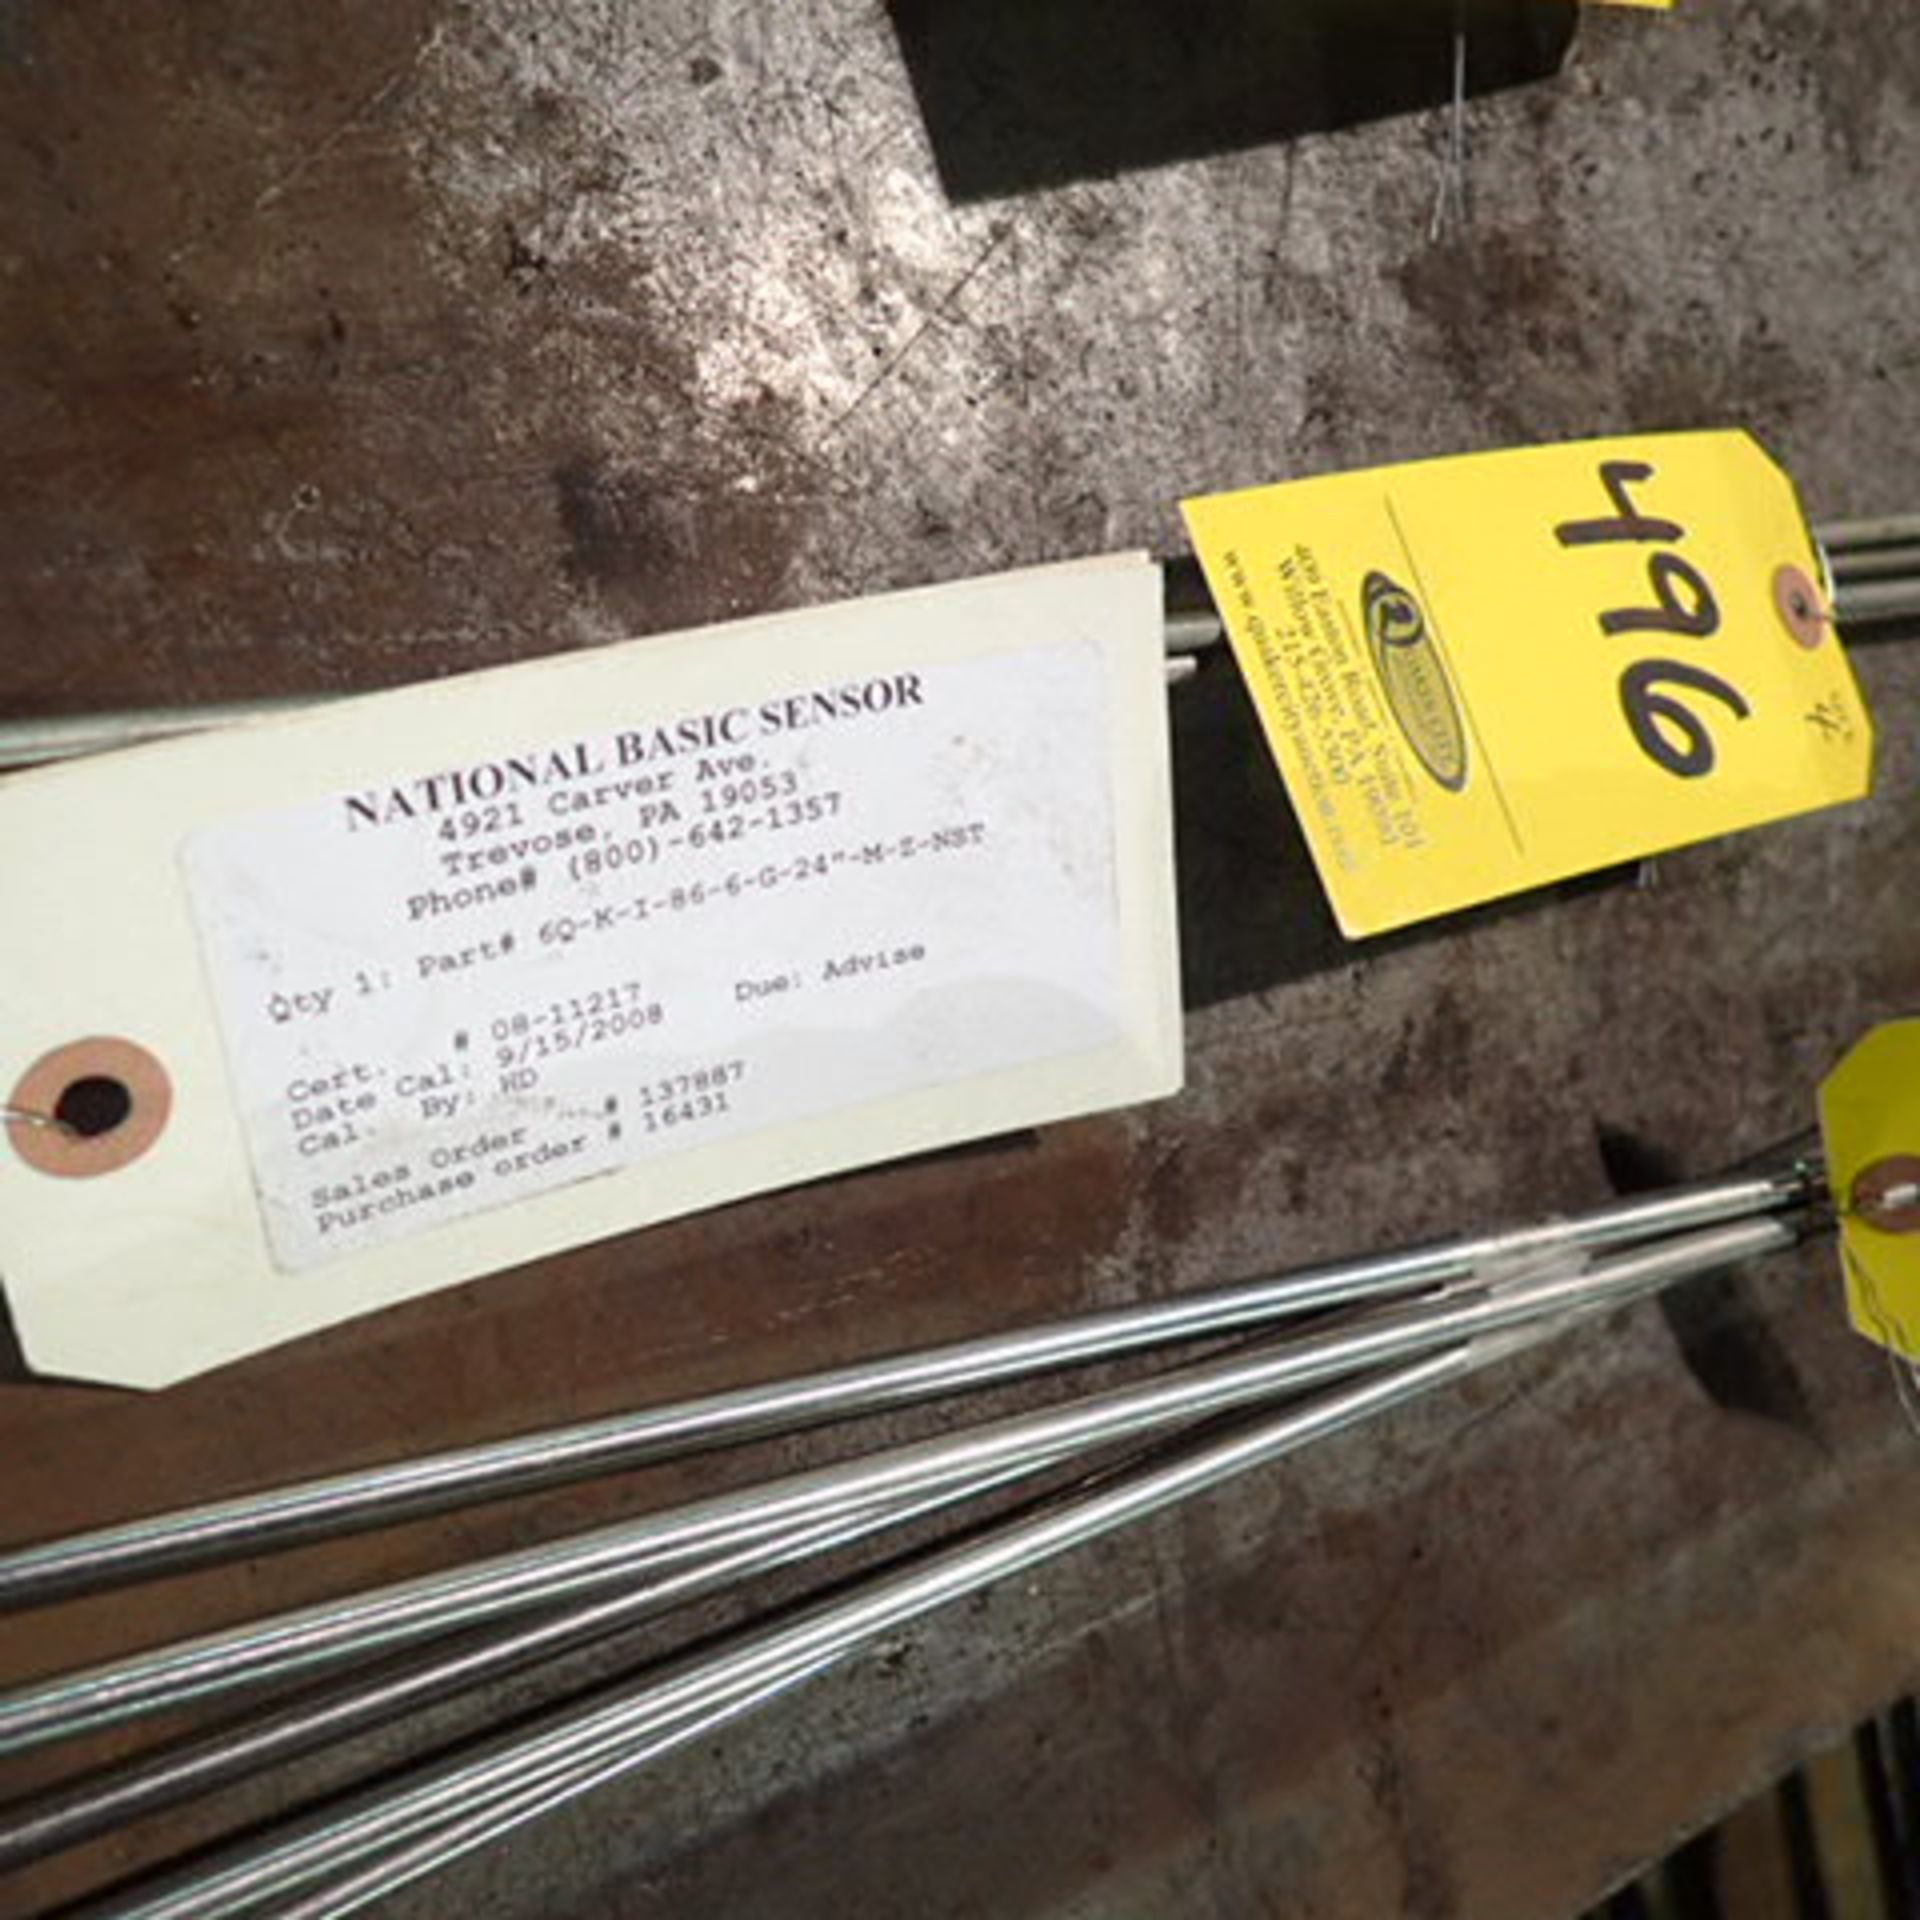 (4) NATIONAL BASIC SENSOR STAINLESS STEEL THERMOCOUPLES - Image 2 of 2